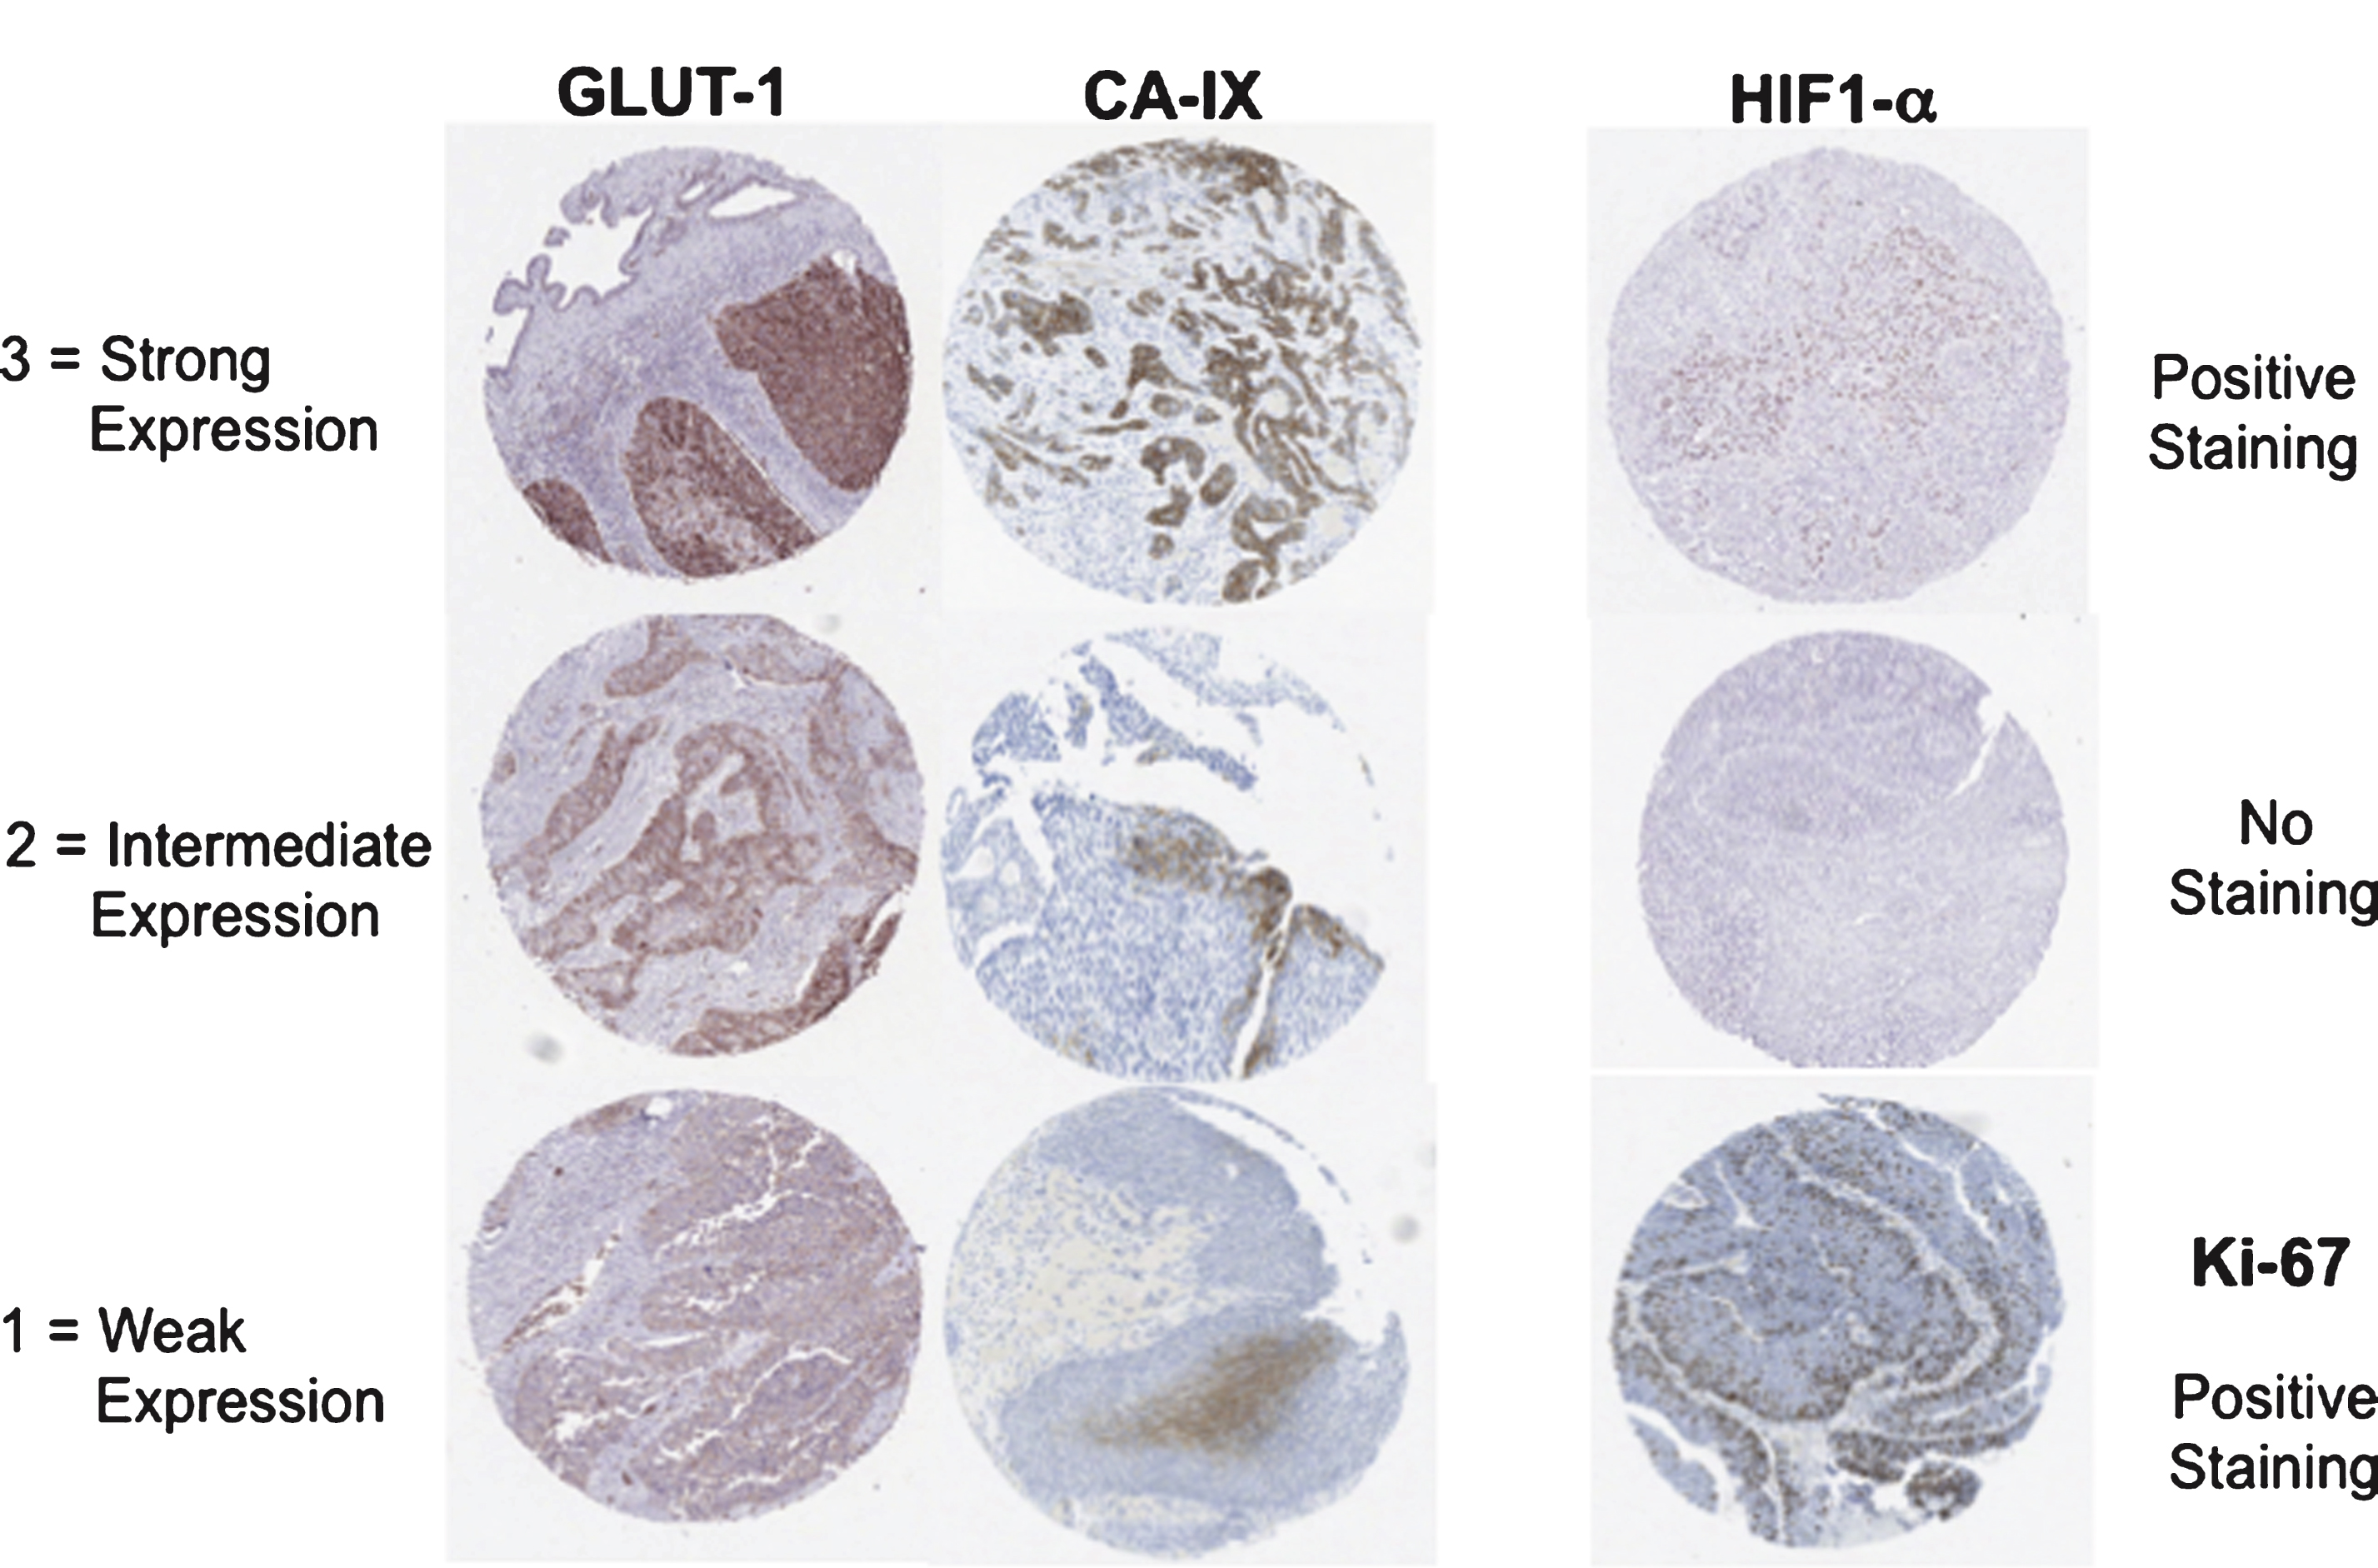 Expression status of hypoxia related markers in bladder cancer tissue. Immunohistochemistry staining of HIF1a, CA-IX, GLUT-1 and Ki-67 in paraffin-embedded TMA sections of bladder cancer tissues.